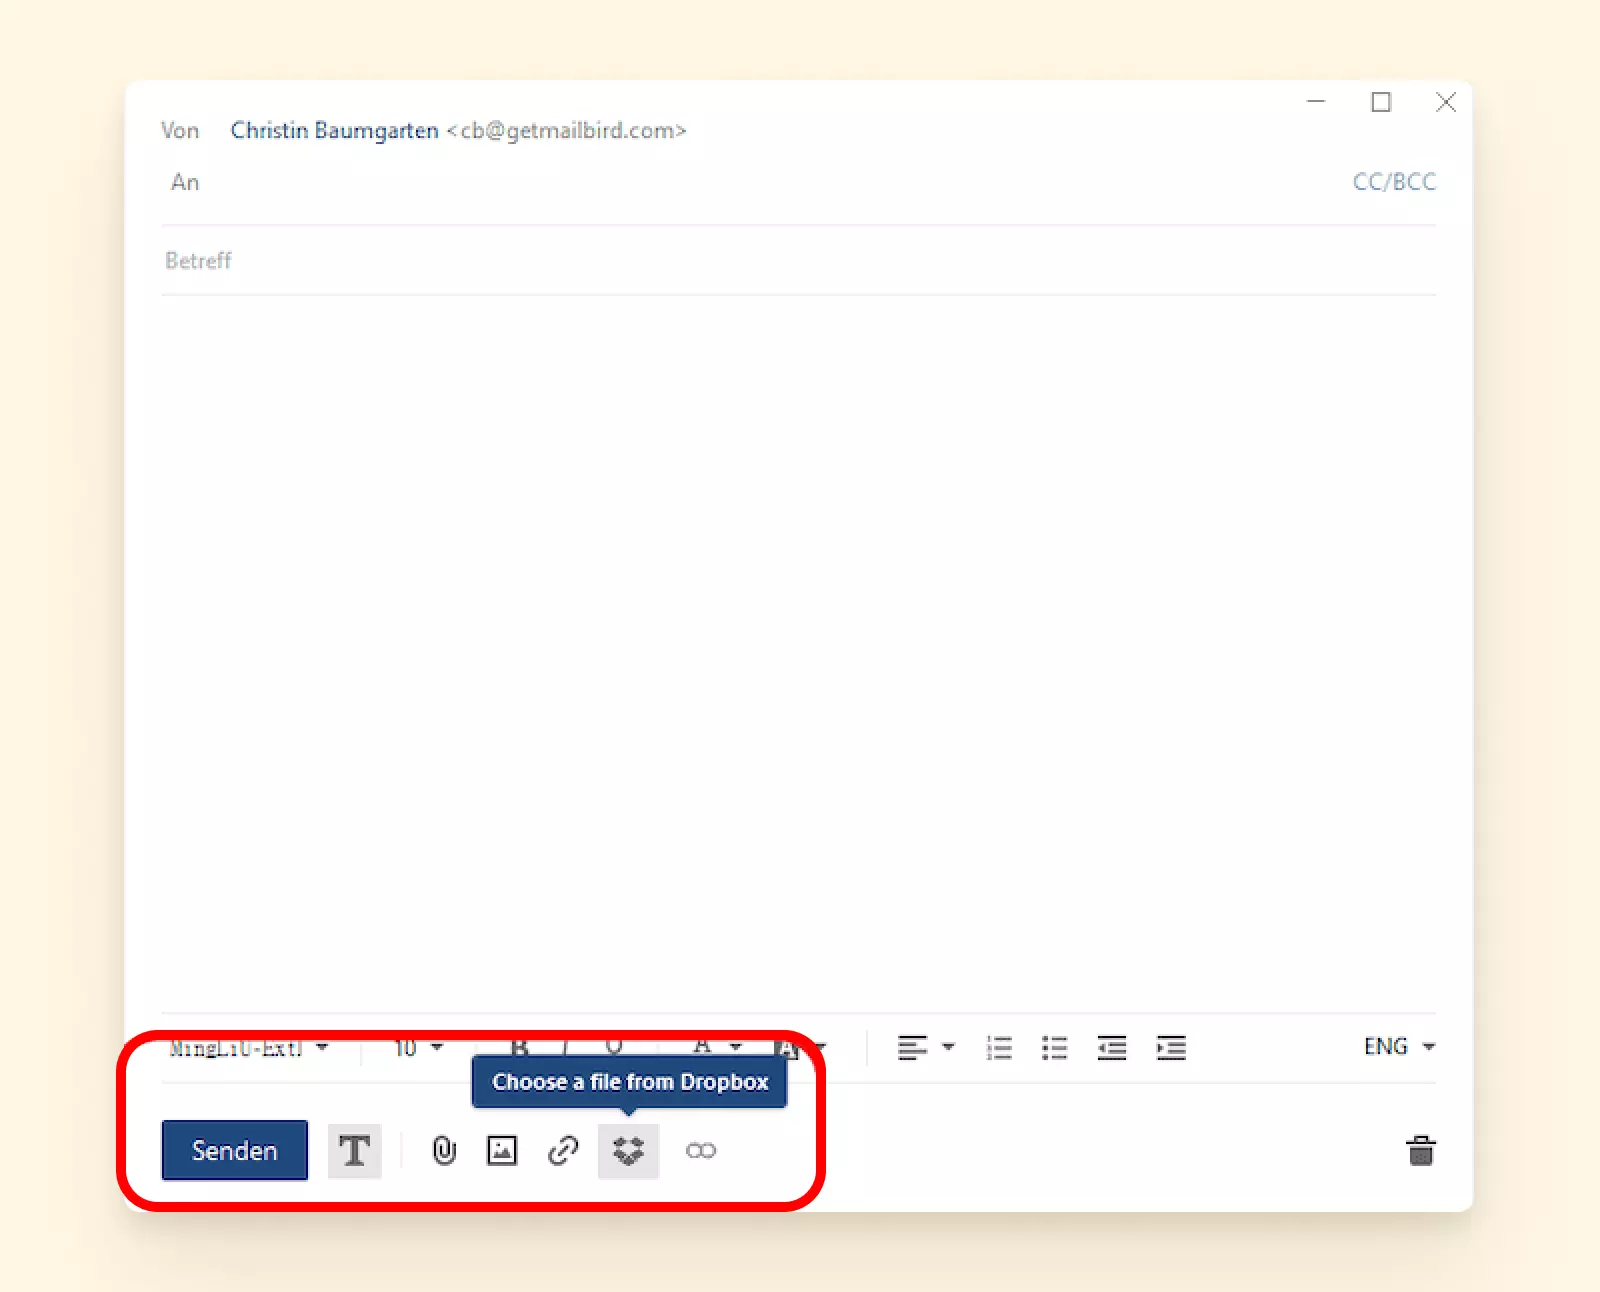 Dropbox integration placement when creating a new email in Mailbird